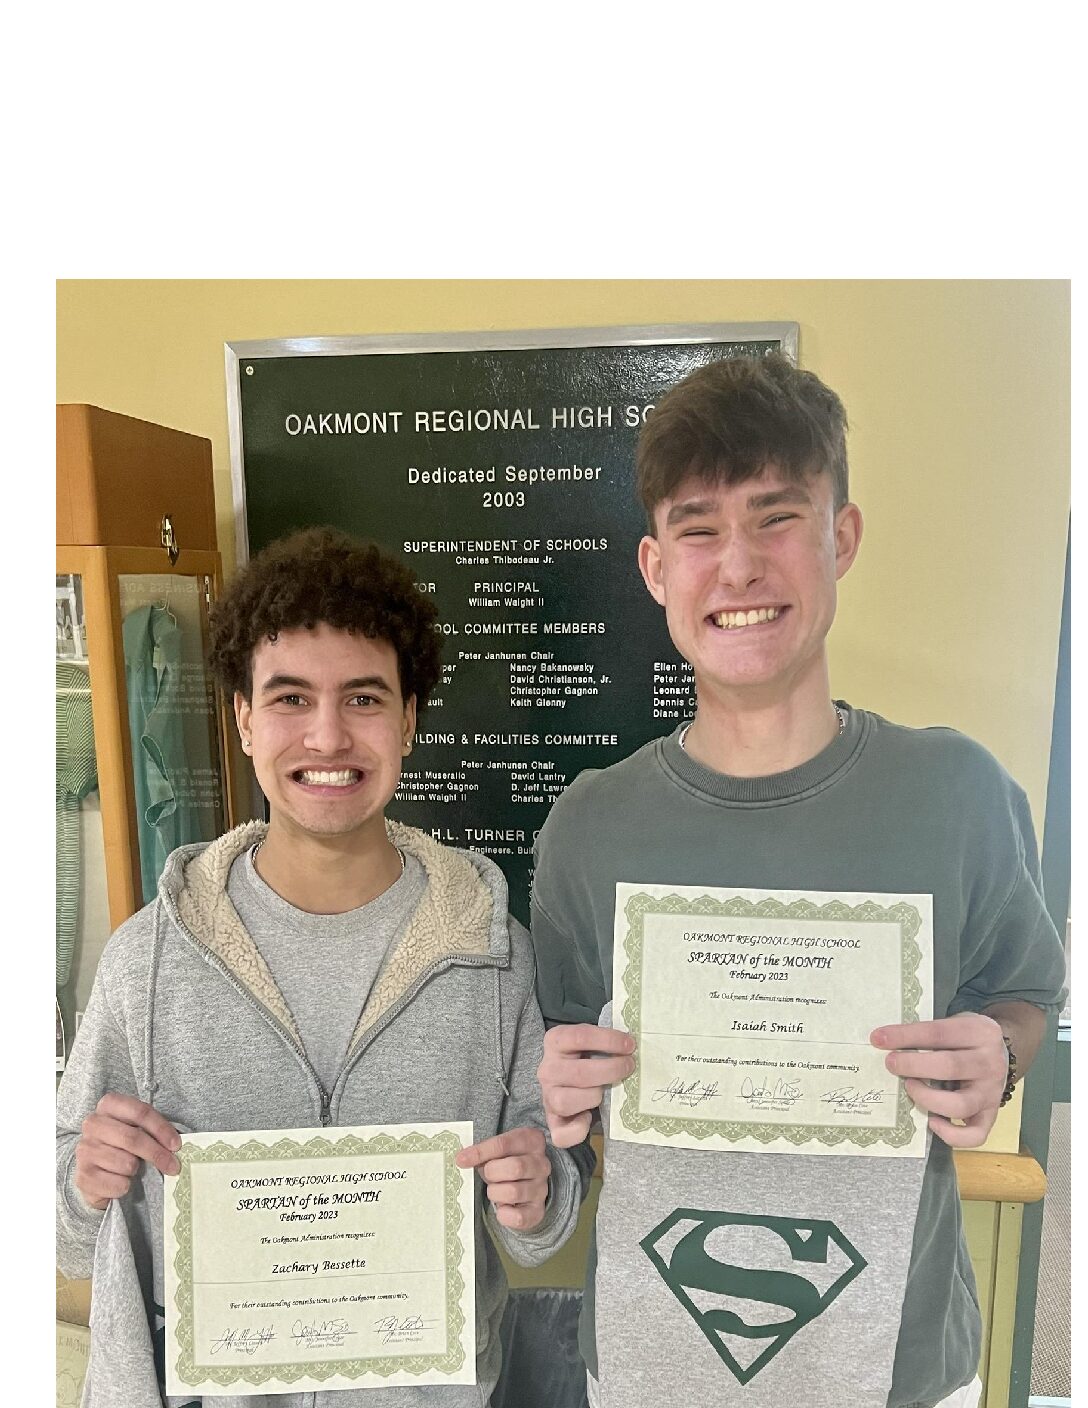 Spartans of the Month: Bessette and Smith